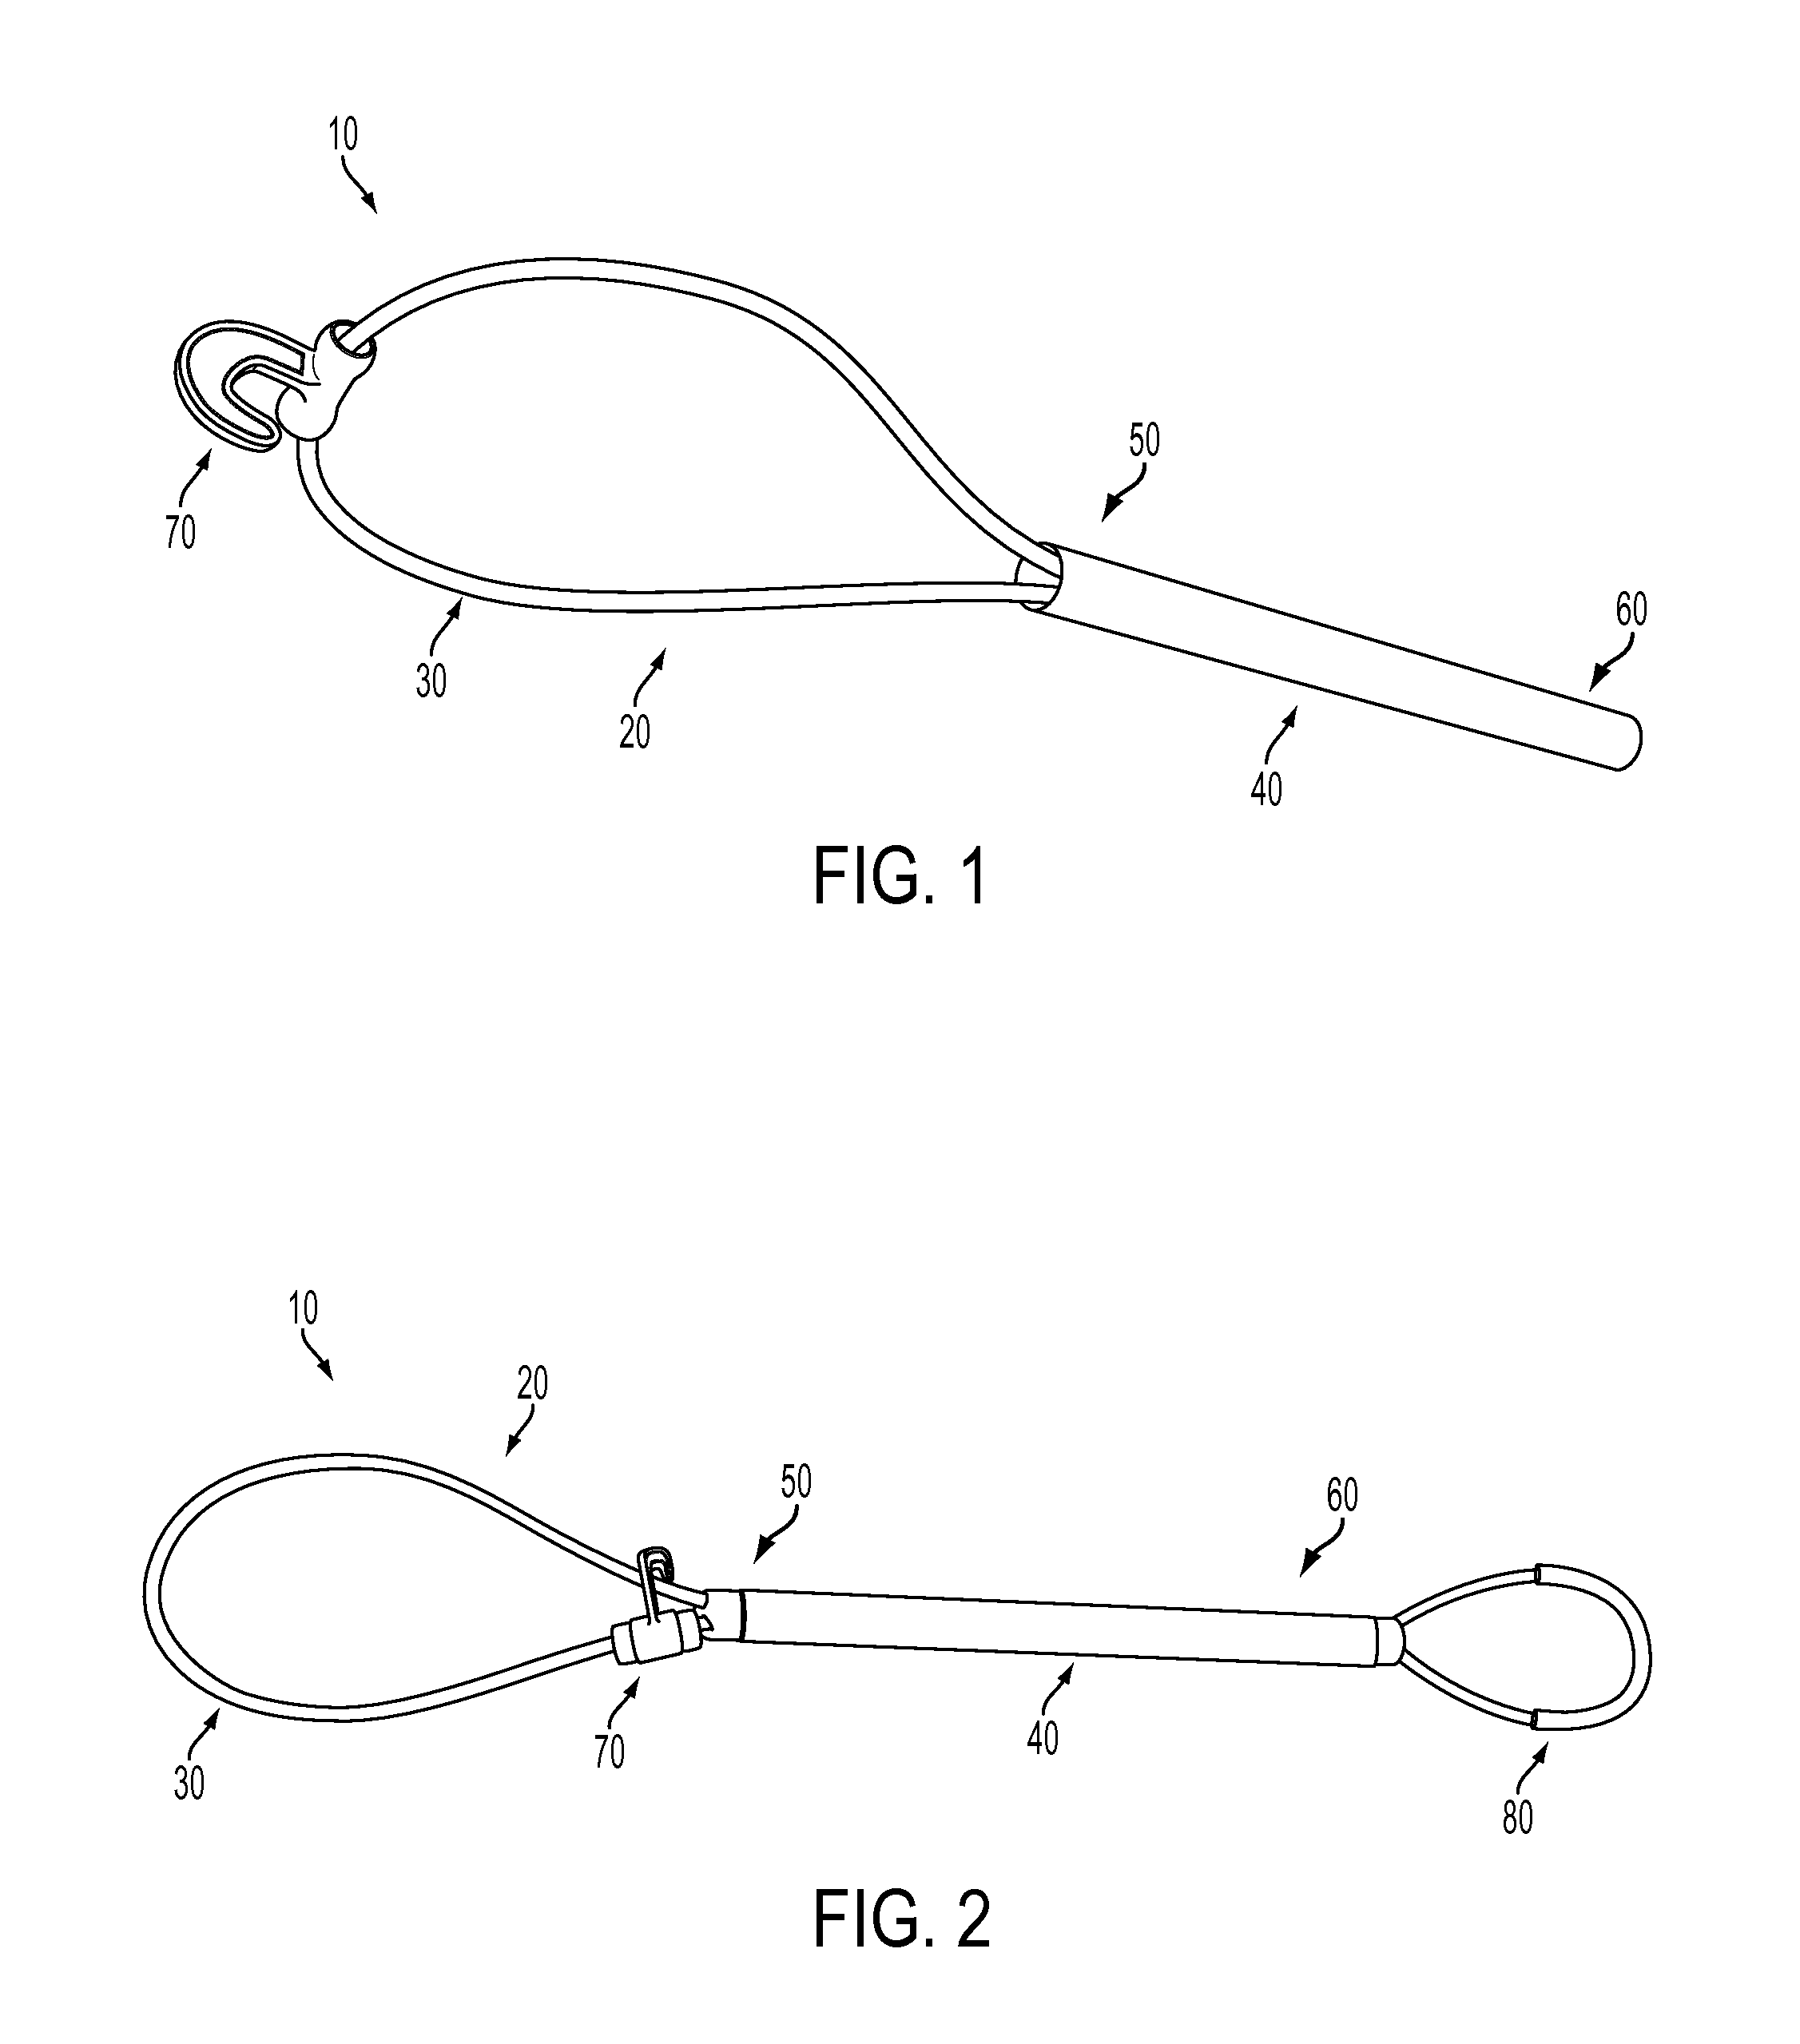 Docking aid apparatus with utility implement